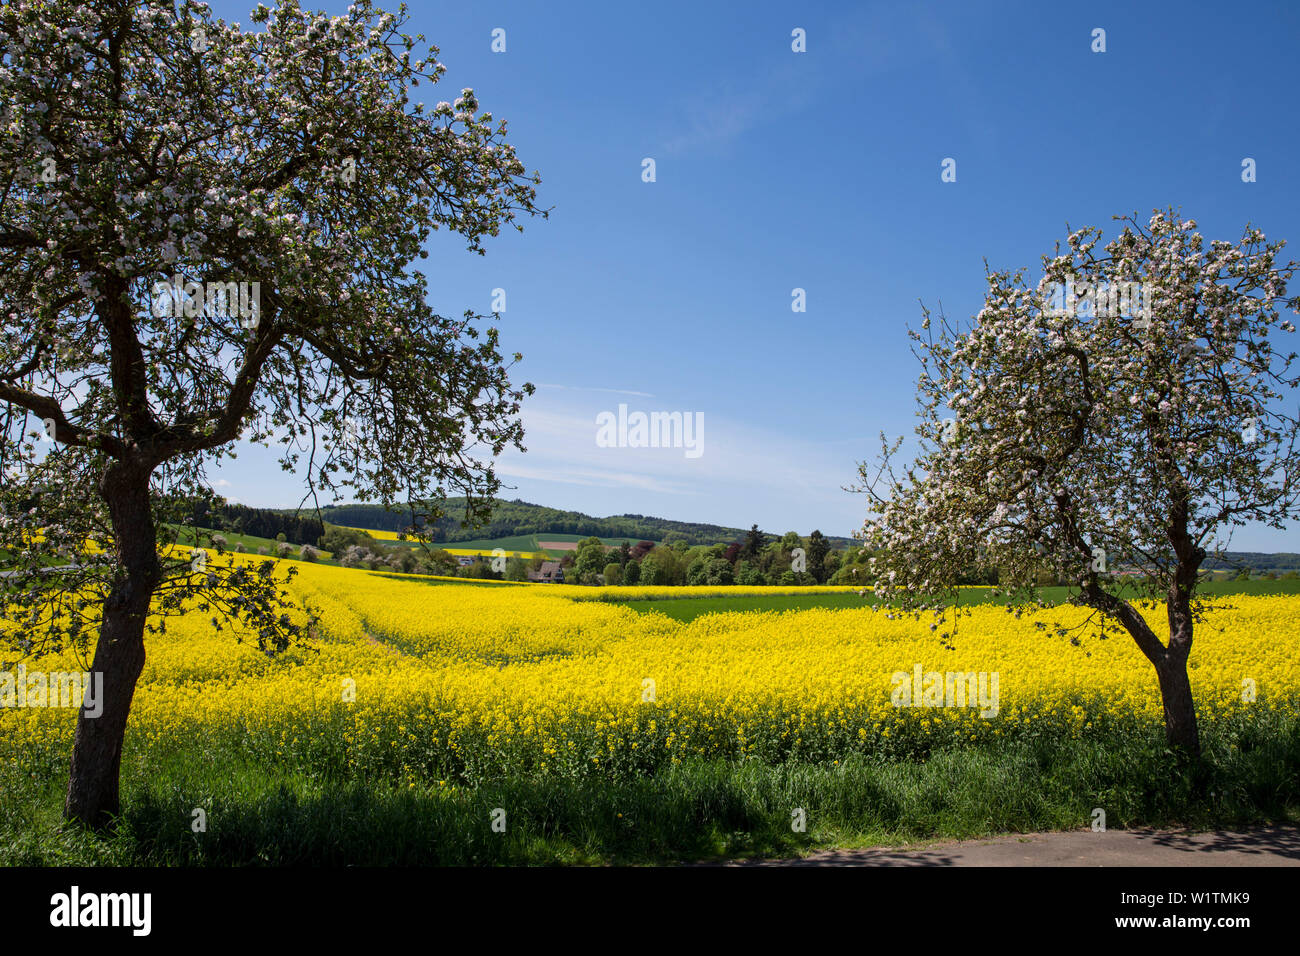 Blossoming apple trees in front of a yellow blooming canola field, Zueschen, Fritzlar, Hesse, Germany, Europe Stock Photo